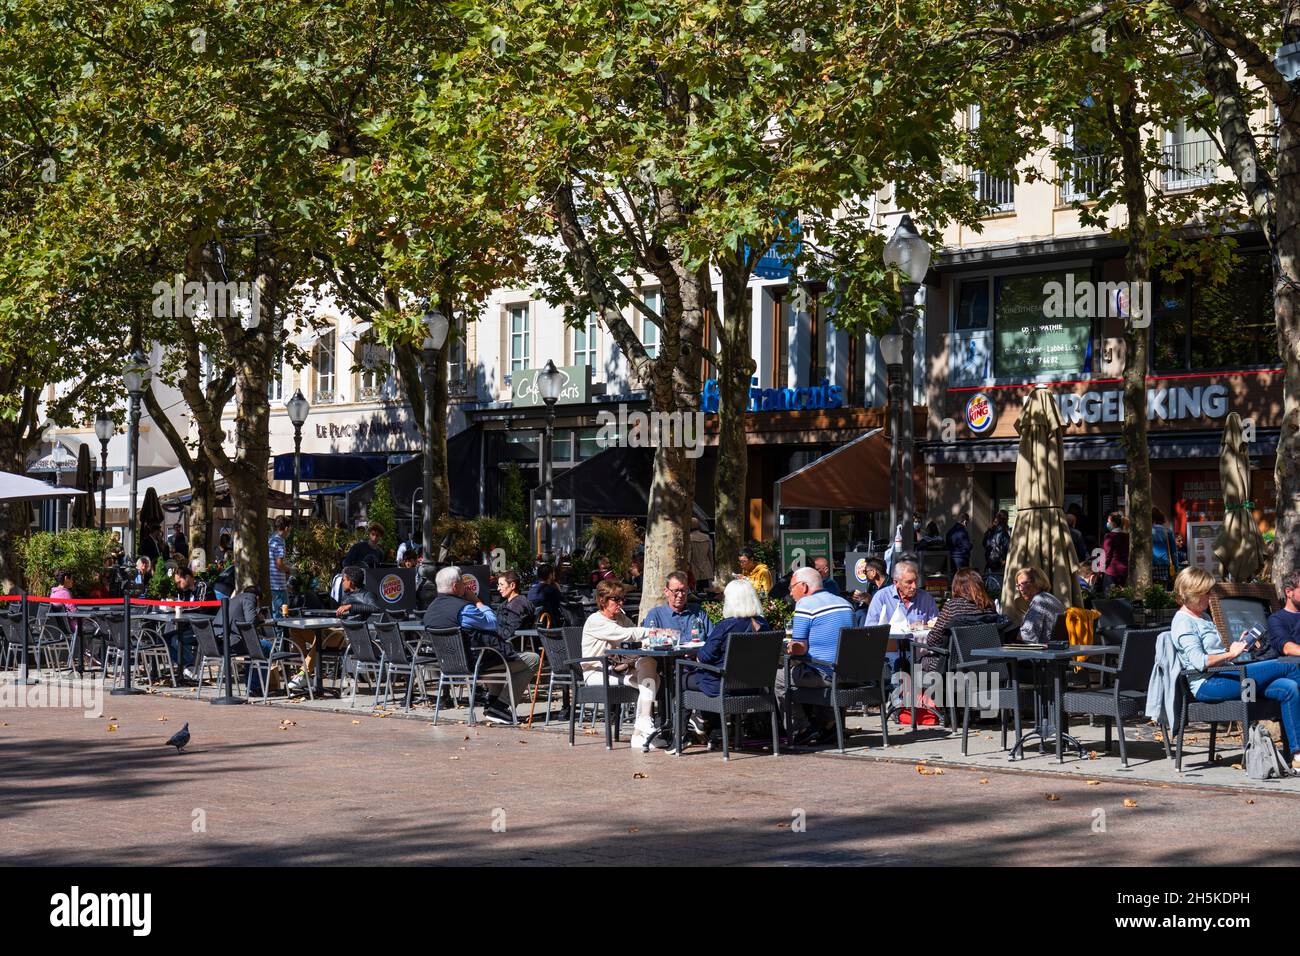 Europe, Luxembourg, Luxembourg City, Ville Haute, Place d'Armes with Cafés and Bars on Rue Genistre Stock Photo